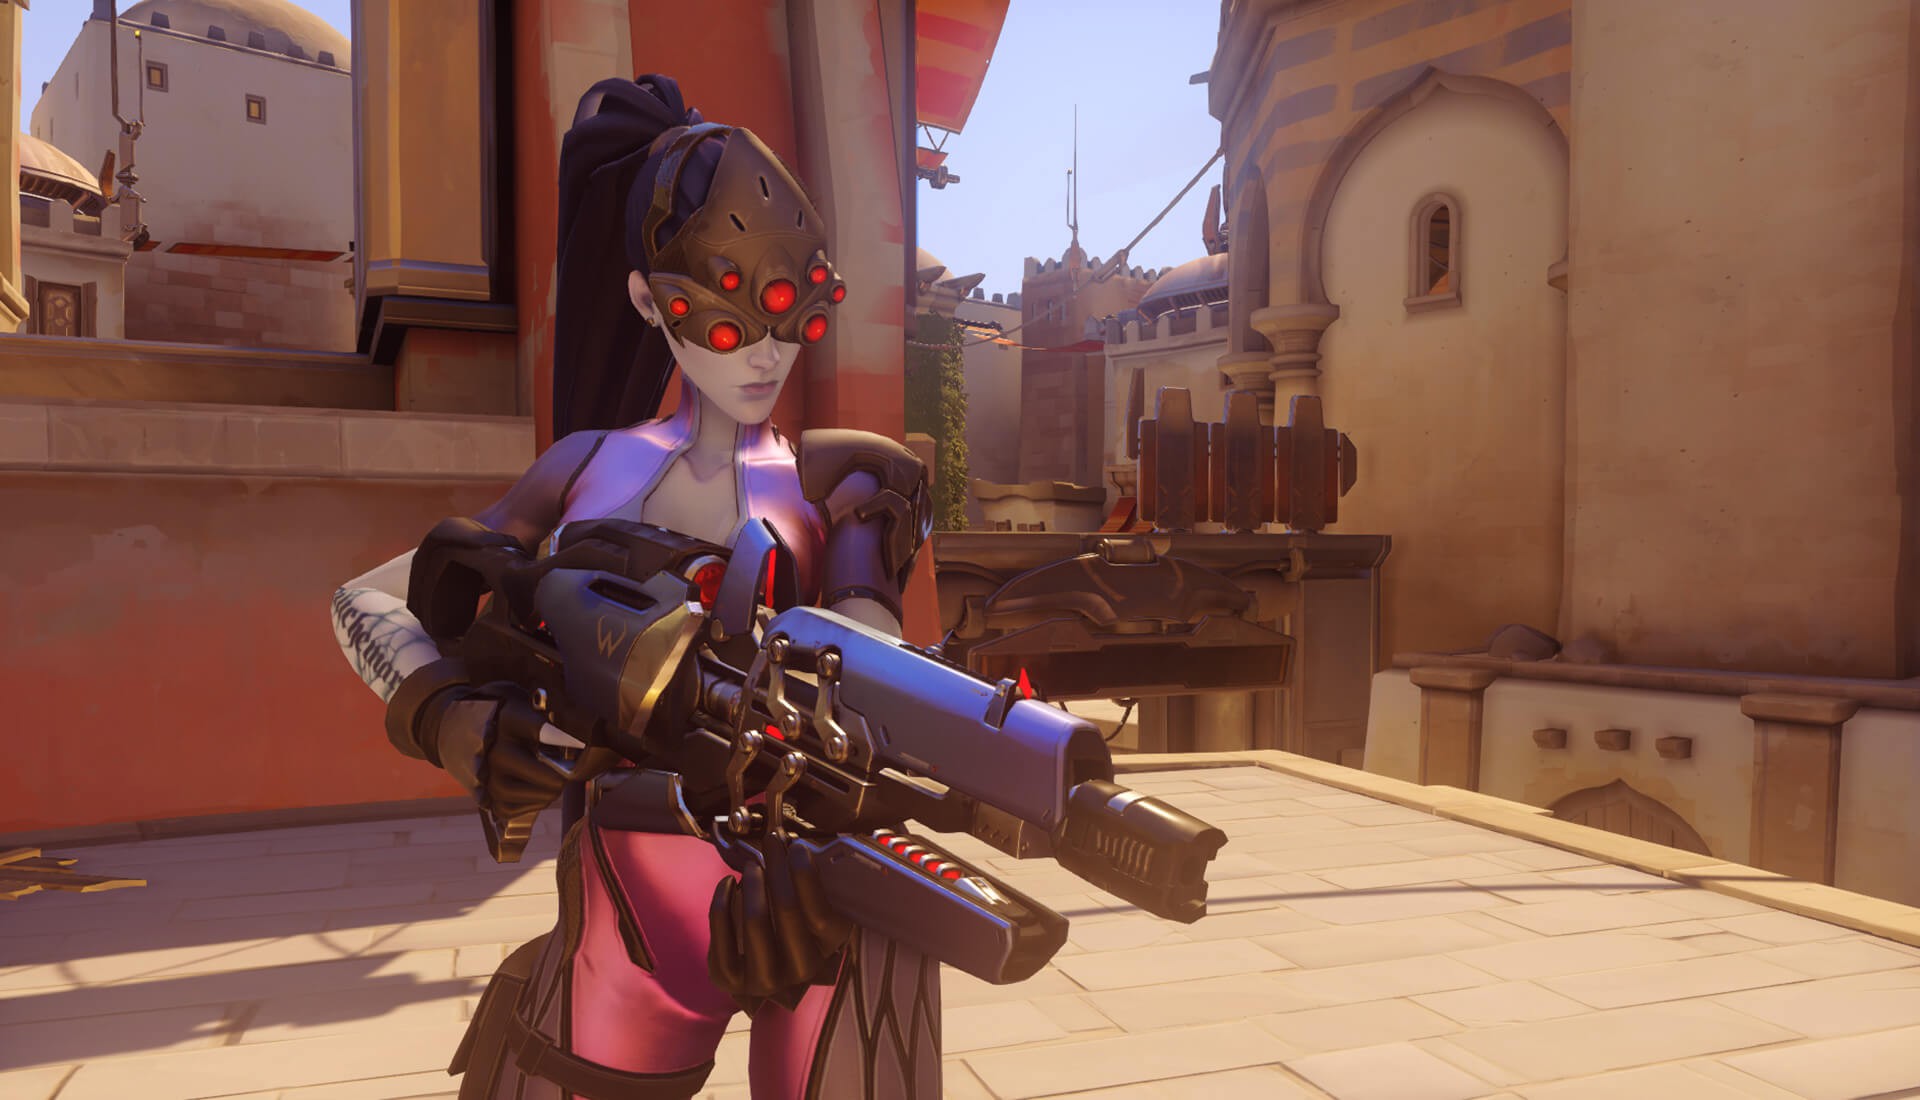 Account Boosting in Overwatch and more now illegal in South Korea